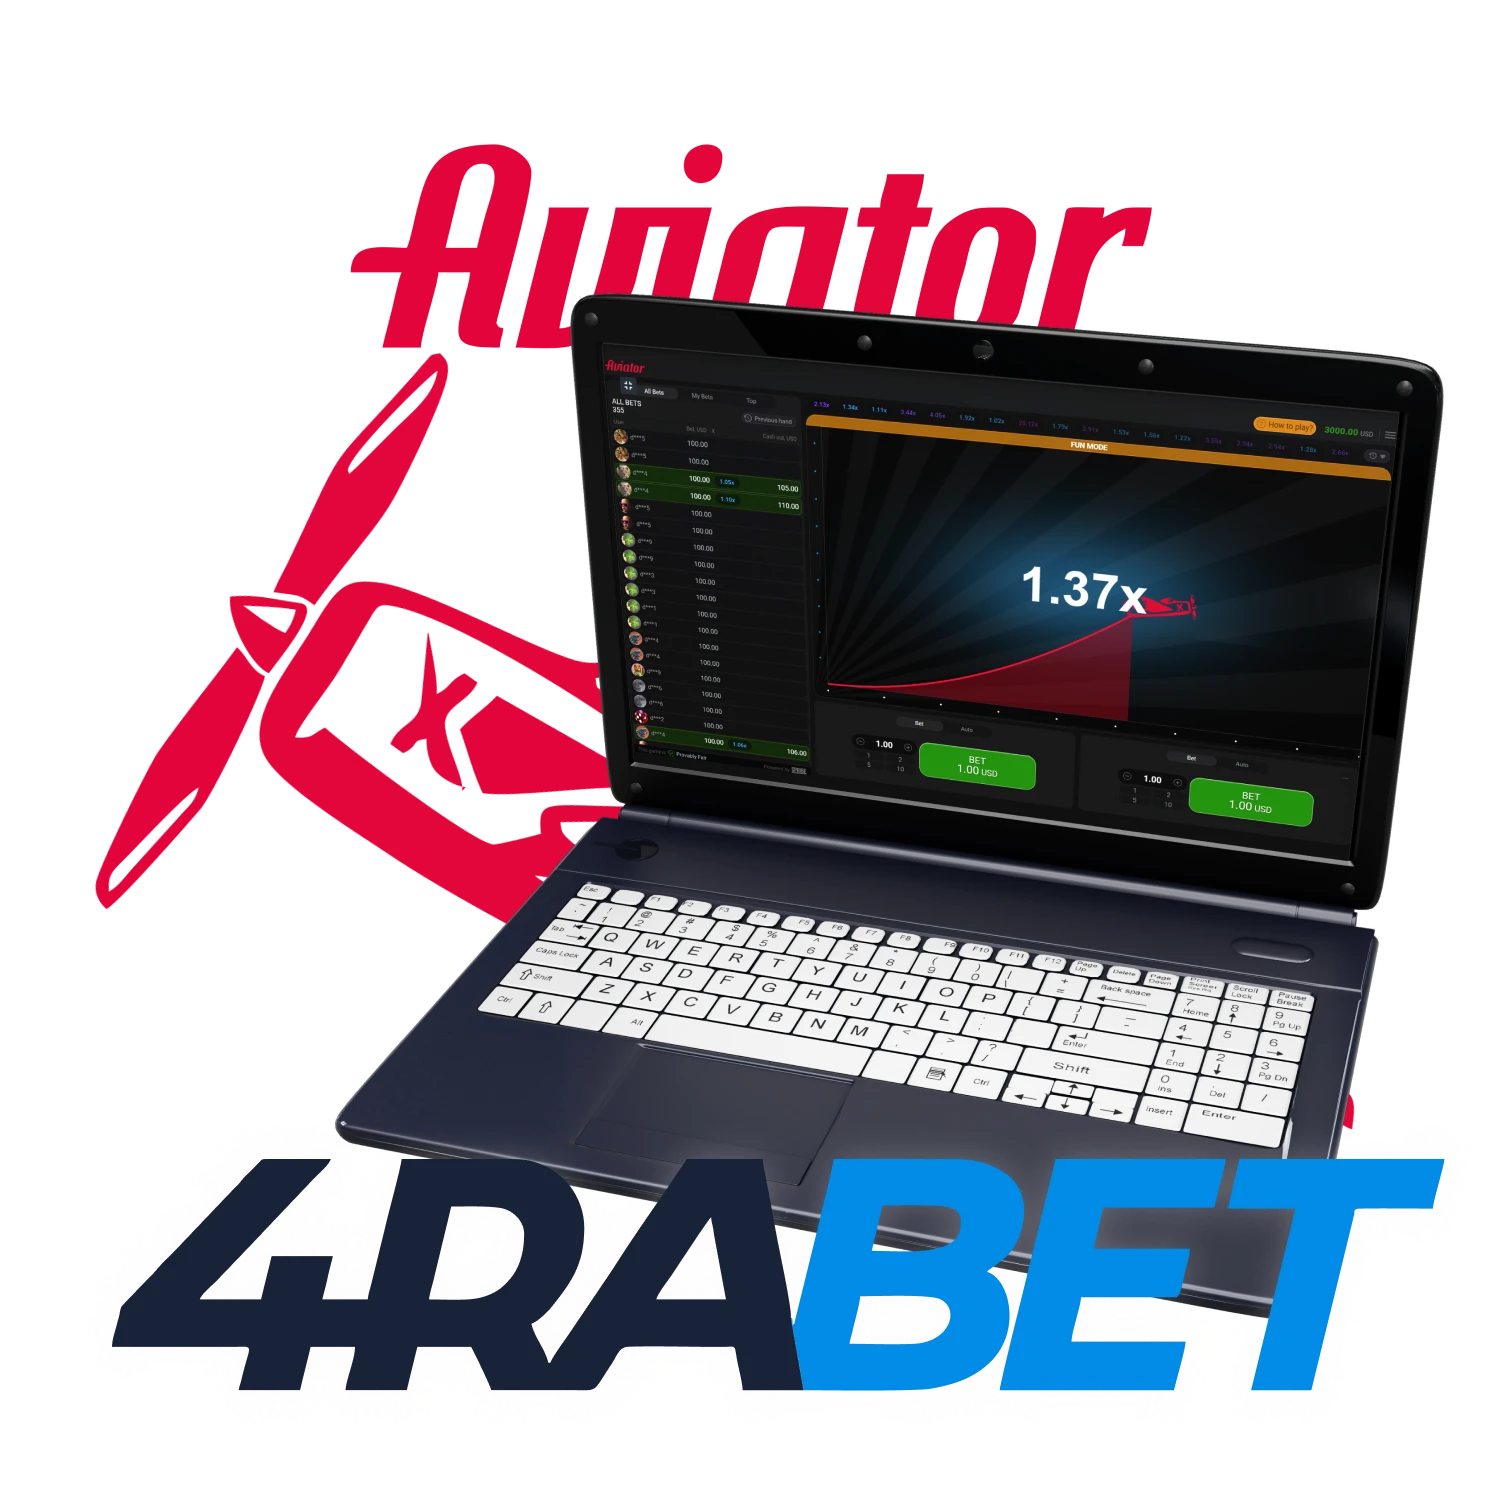 Learn how to play Aviator on the 4rabet website.